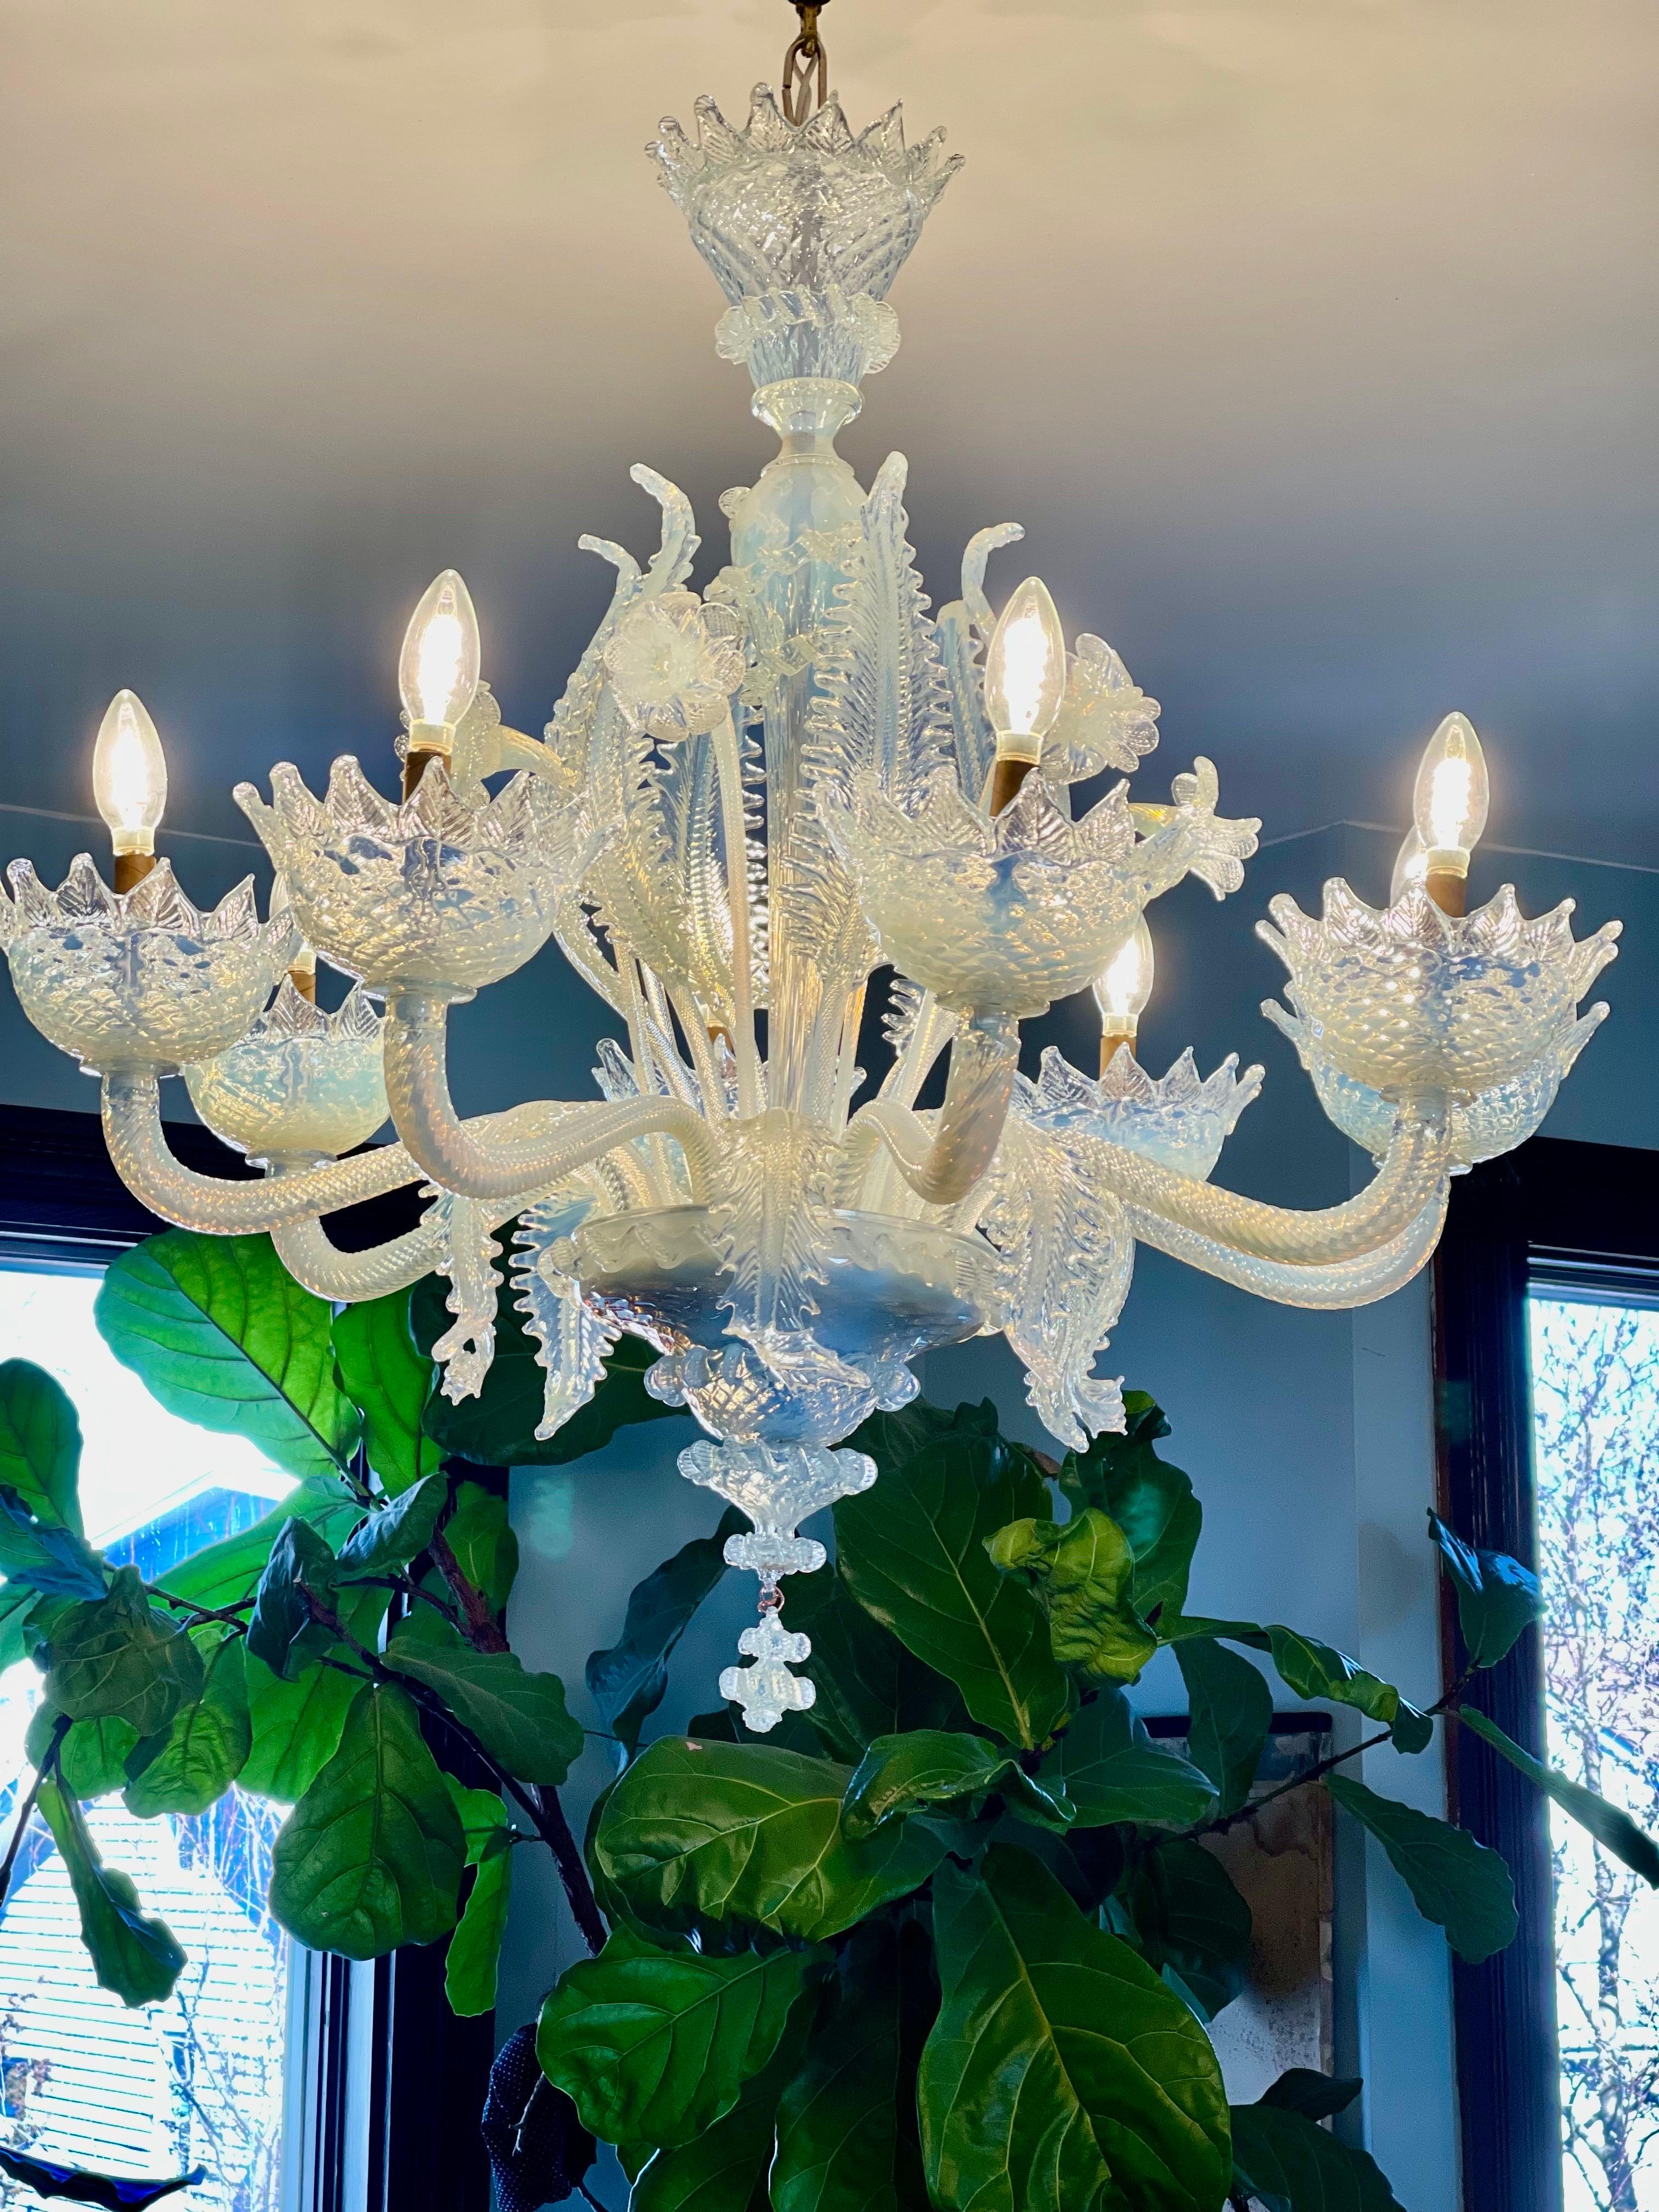 This Murano Chandelier in a very rare light blue opaline Glass comes with 8 Arms. It was hand made in Murano Italy ca 1940. The color shown in all the Images is accurate.
In all my years as an Antique Dealer I have not seen such an unusual color.  